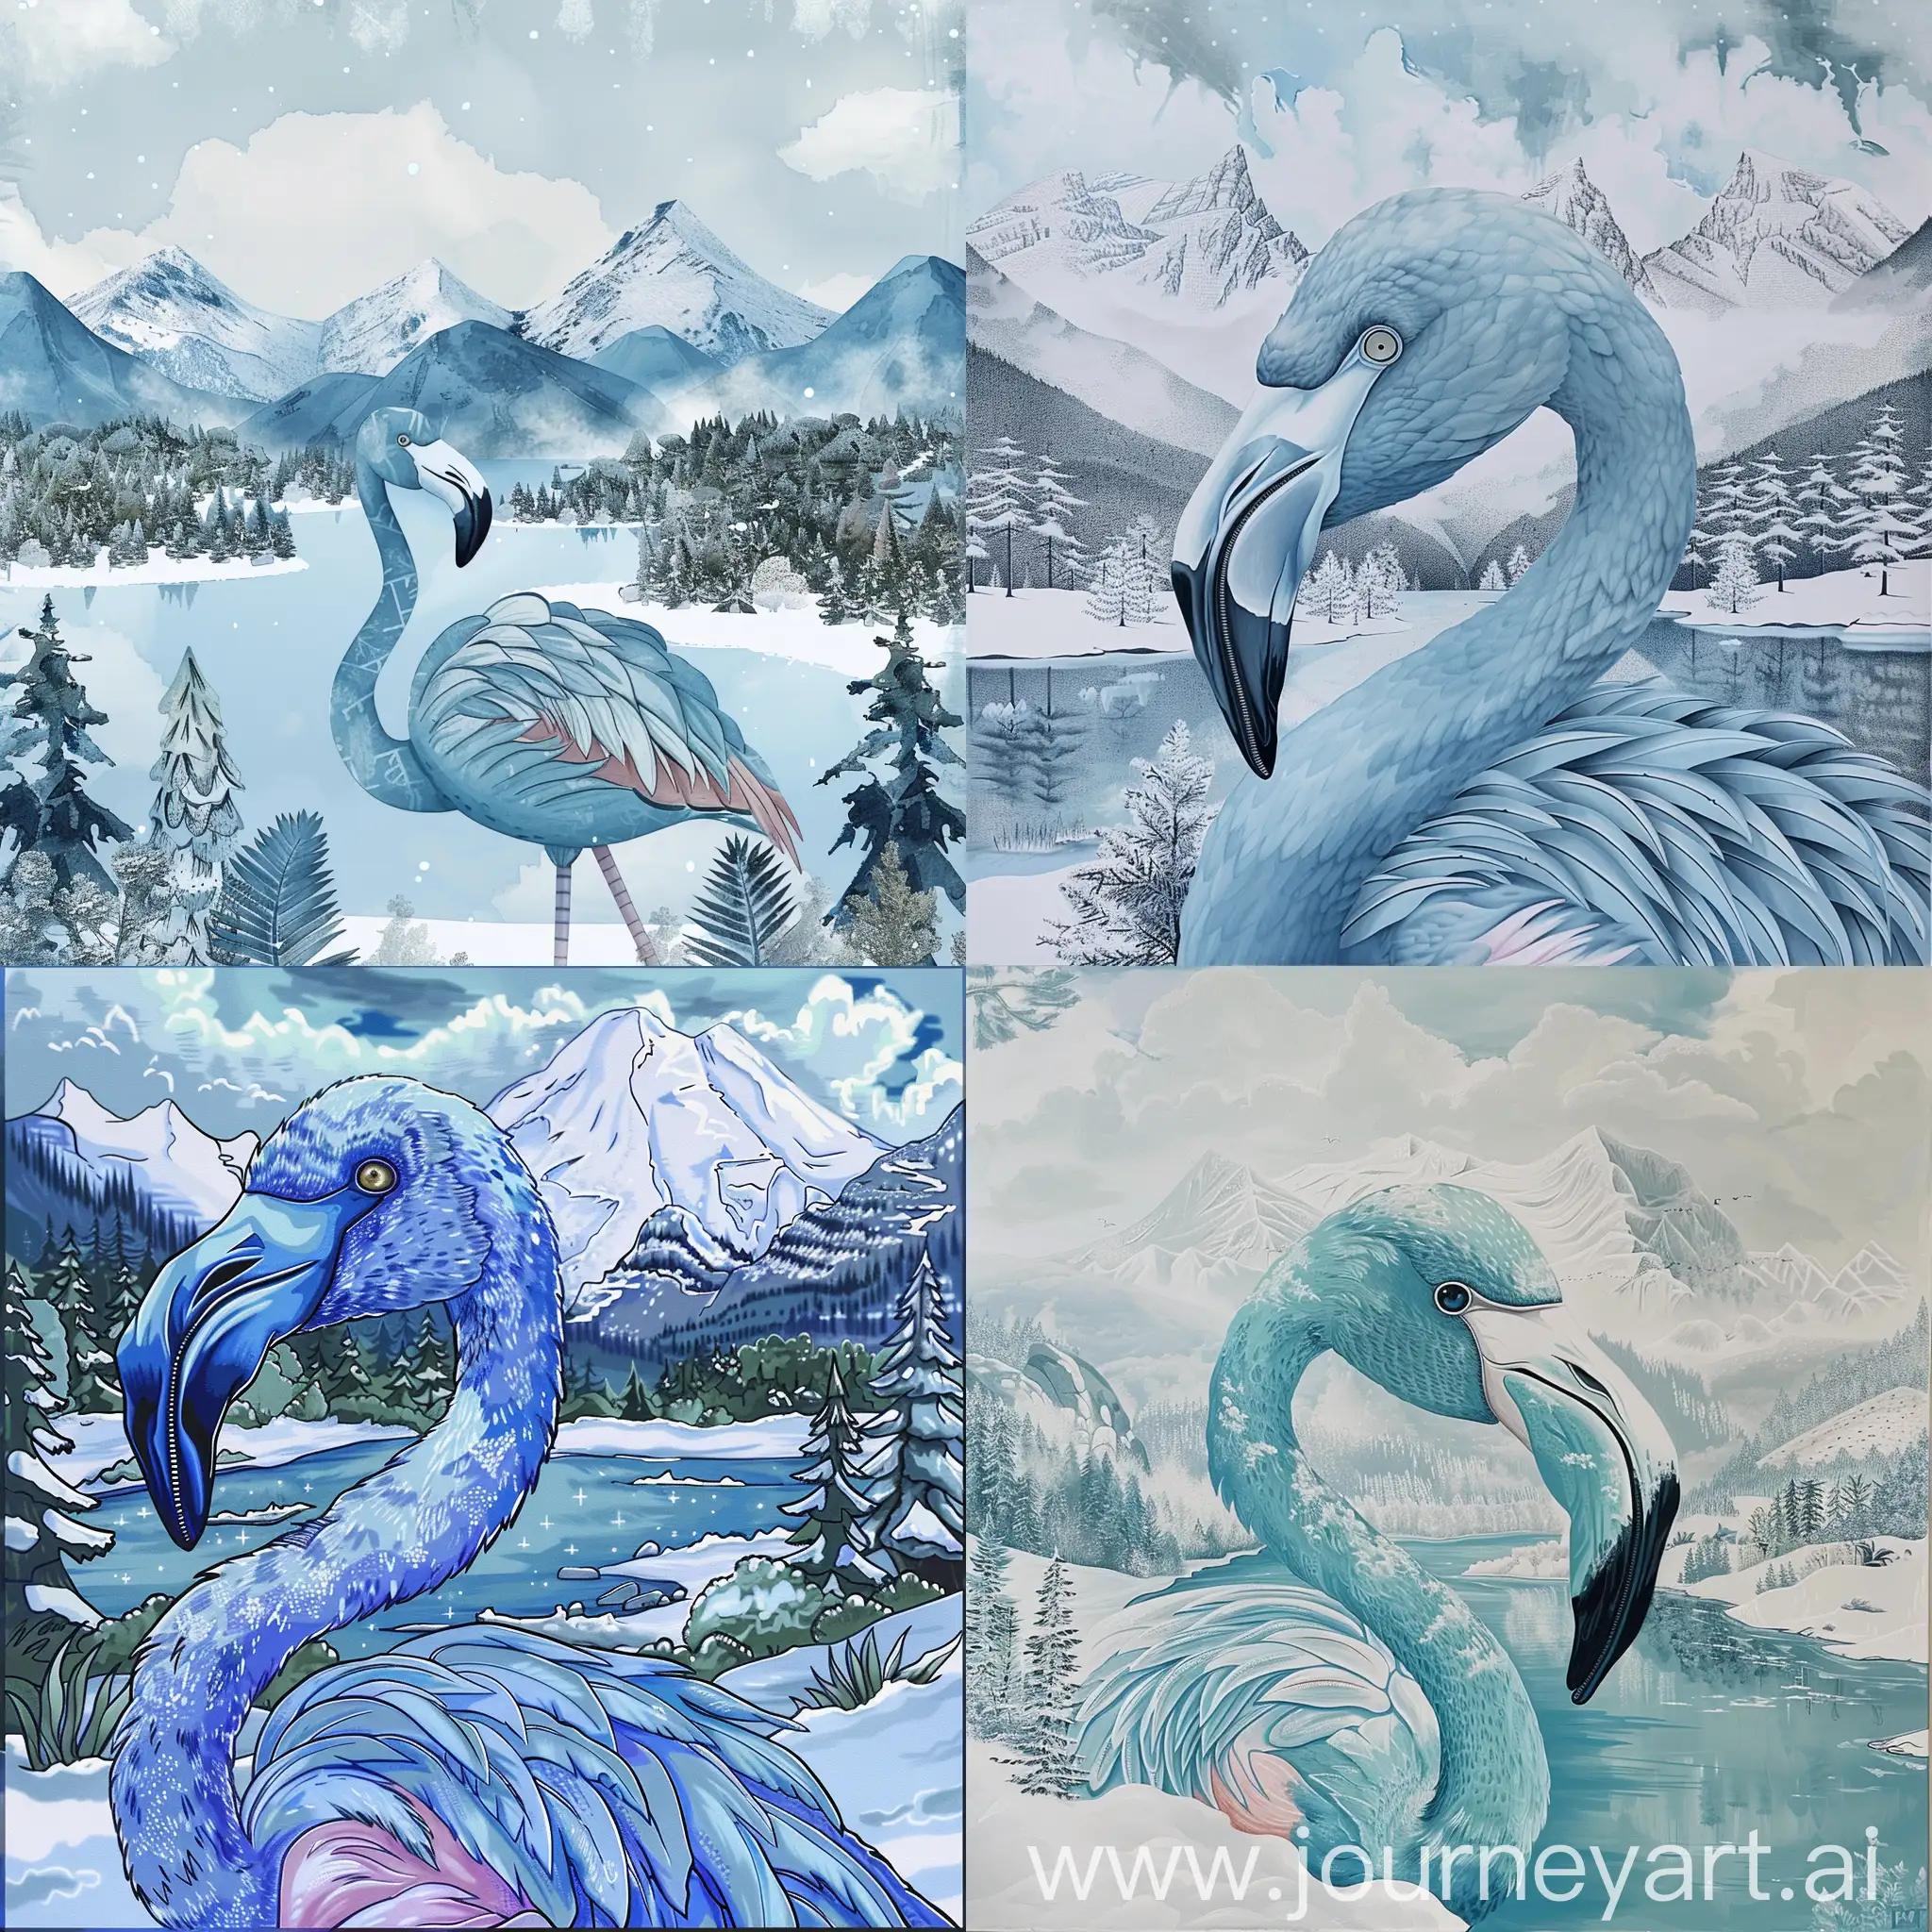 Winter-Mountain-Lake-Scene-with-Light-Blue-Flamingo-and-Dark-Blue-Nose